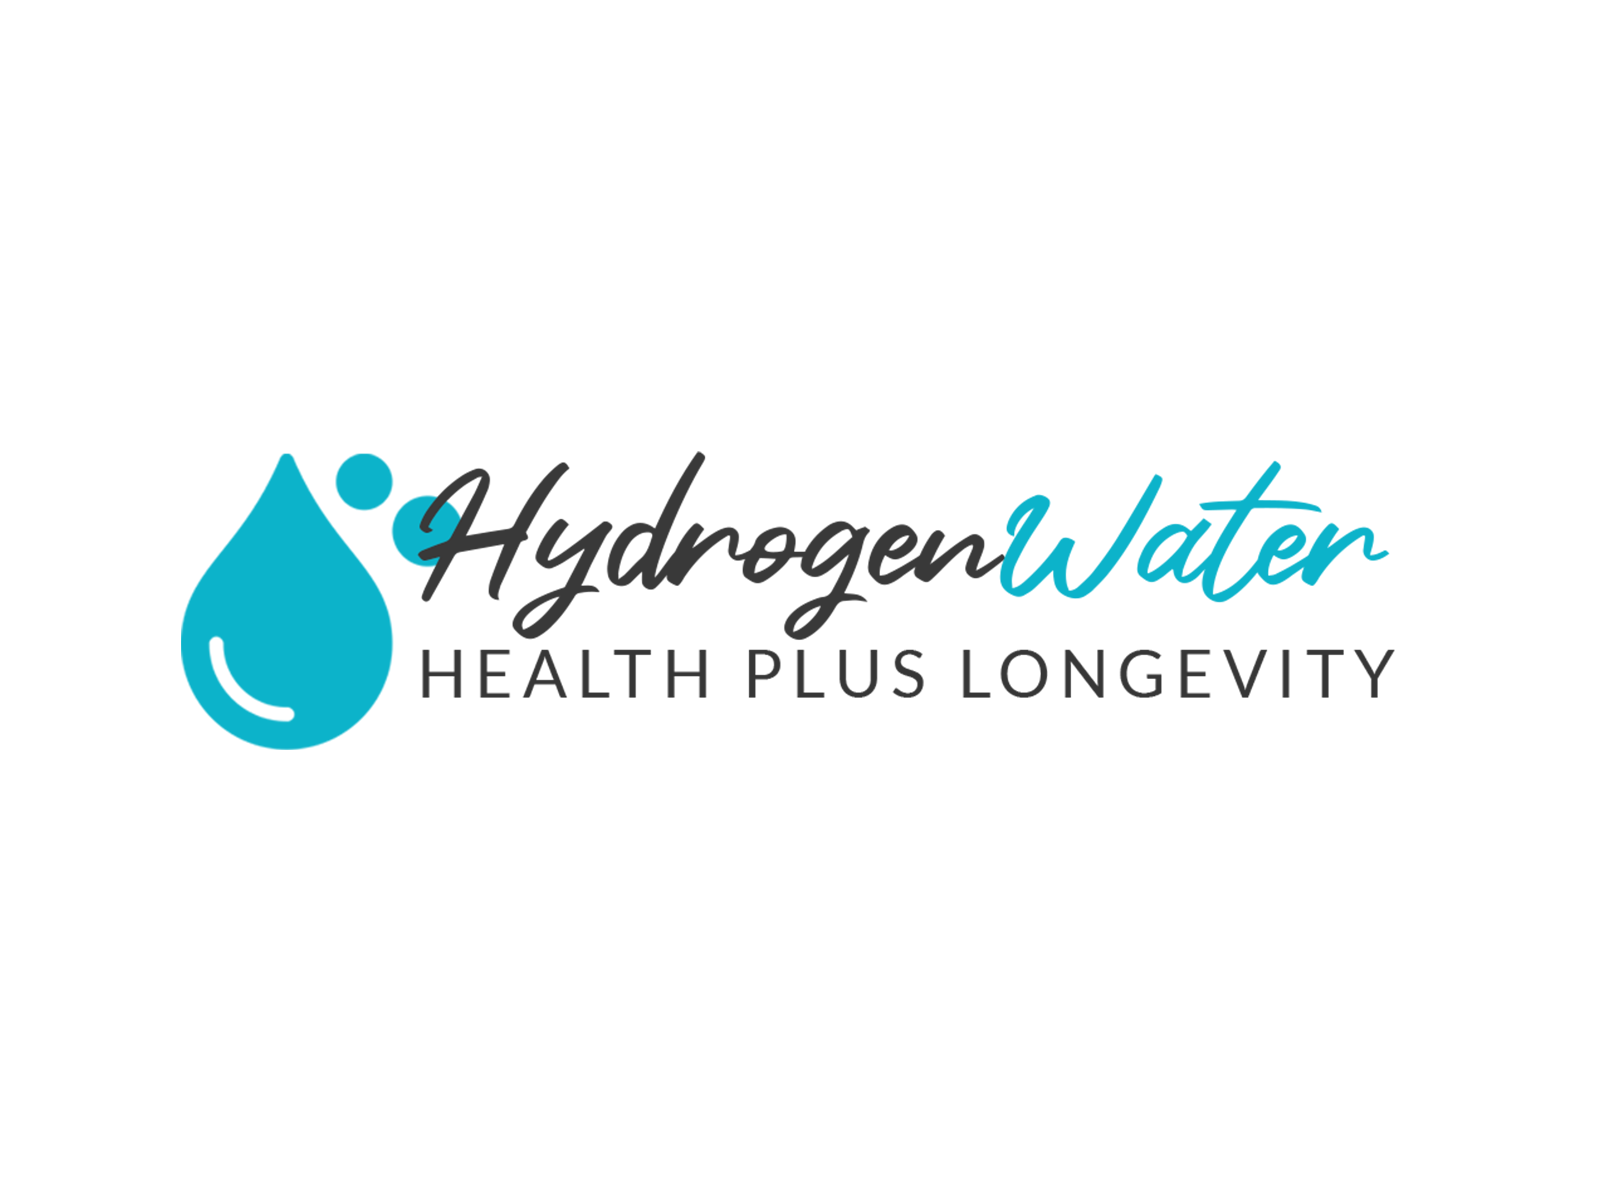 Hydrogen Water Logo by Justin Anderson on Dribbble